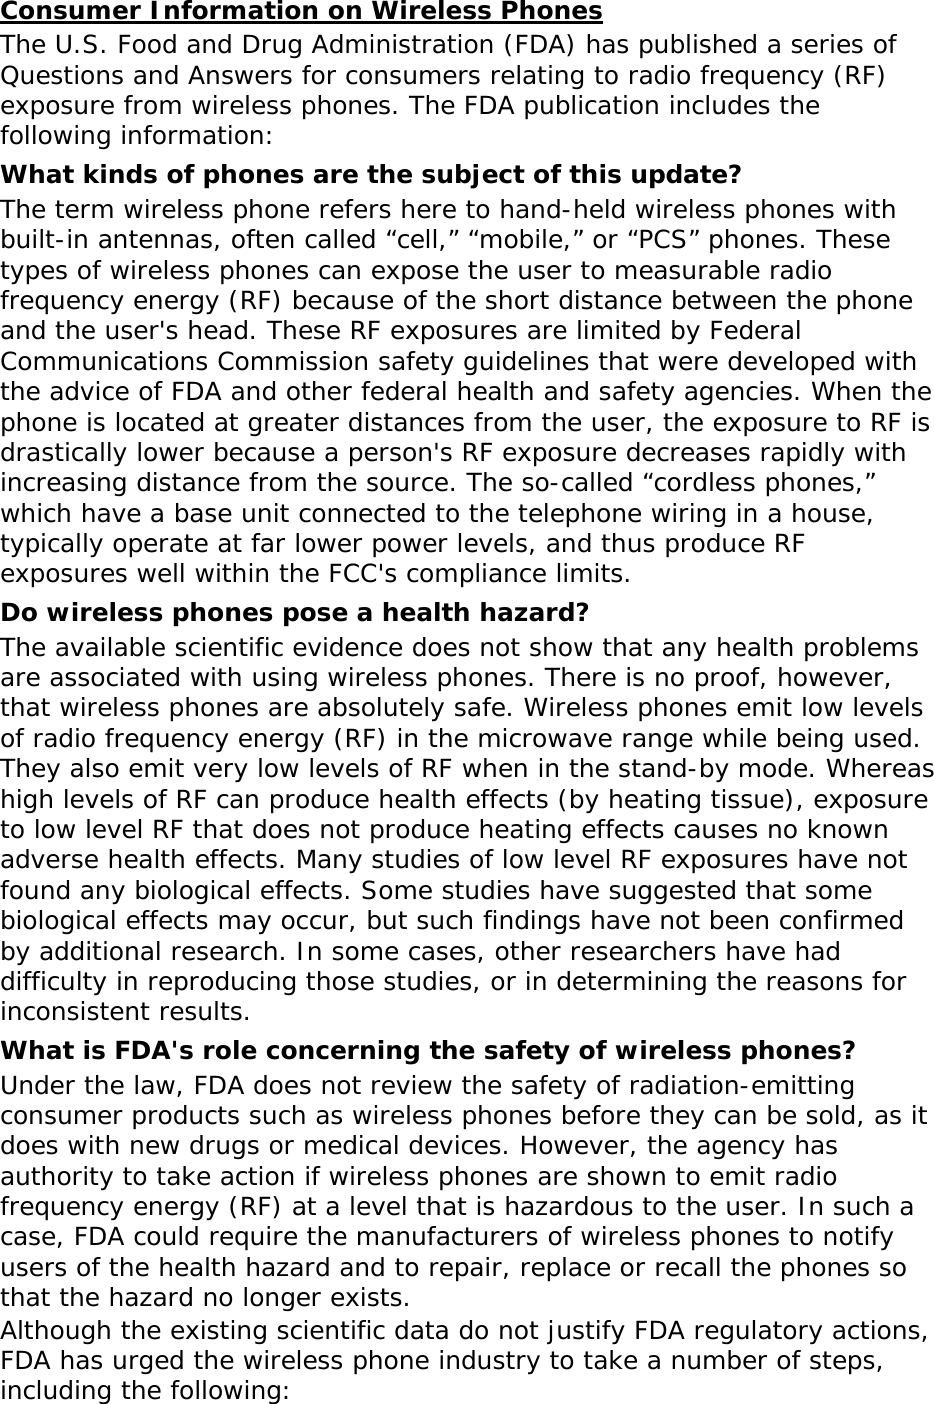 UConsumer Information on Wireless Phones The U.S. Food and Drug Administration (FDA) has published a series of Questions and Answers for consumers relating to radio frequency (RF) exposure from wireless phones. The FDA publication includes the following information: What kinds of phones are the subject of this update? The term wireless phone refers here to hand-held wireless phones with built-in antennas, often called “cell,” “mobile,” or “PCS” phones. These types of wireless phones can expose the user to measurable radio frequency energy (RF) because of the short distance between the phone and the user&apos;s head. These RF exposures are limited by Federal Communications Commission safety guidelines that were developed with the advice of FDA and other federal health and safety agencies. When the phone is located at greater distances from the user, the exposure to RF is drastically lower because a person&apos;s RF exposure decreases rapidly with increasing distance from the source. The so-called “cordless phones,” which have a base unit connected to the telephone wiring in a house, typically operate at far lower power levels, and thus produce RF exposures well within the FCC&apos;s compliance limits. Do wireless phones pose a health hazard? The available scientific evidence does not show that any health problems are associated with using wireless phones. There is no proof, however, that wireless phones are absolutely safe. Wireless phones emit low levels of radio frequency energy (RF) in the microwave range while being used. They also emit very low levels of RF when in the stand-by mode. Whereas high levels of RF can produce health effects (by heating tissue), exposure to low level RF that does not produce heating effects causes no known adverse health effects. Many studies of low level RF exposures have not found any biological effects. Some studies have suggested that some biological effects may occur, but such findings have not been confirmed by additional research. In some cases, other researchers have had difficulty in reproducing those studies, or in determining the reasons for inconsistent results. What is FDA&apos;s role concerning the safety of wireless phones? Under the law, FDA does not review the safety of radiation-emitting consumer products such as wireless phones before they can be sold, as it does with new drugs or medical devices. However, the agency has authority to take action if wireless phones are shown to emit radio frequency energy (RF) at a level that is hazardous to the user. In such a case, FDA could require the manufacturers of wireless phones to notify users of the health hazard and to repair, replace or recall the phones so that the hazard no longer exists. Although the existing scientific data do not justify FDA regulatory actions, FDA has urged the wireless phone industry to take a number of steps, including the following: 